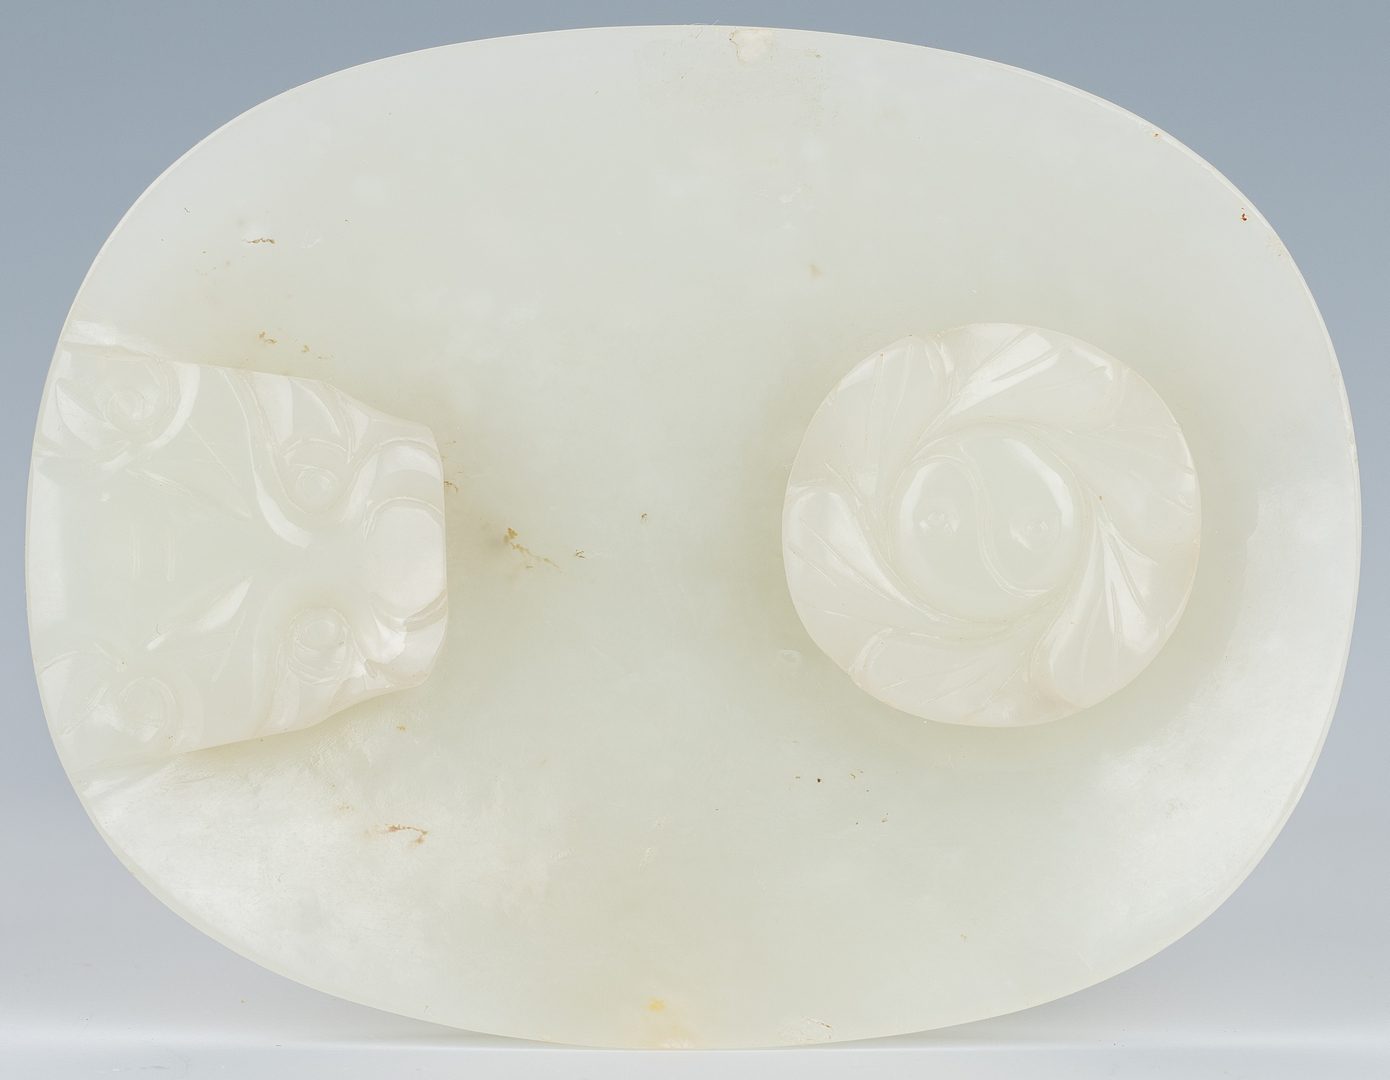 Lot 2: Carved Oval Chinese White Jade Buckle